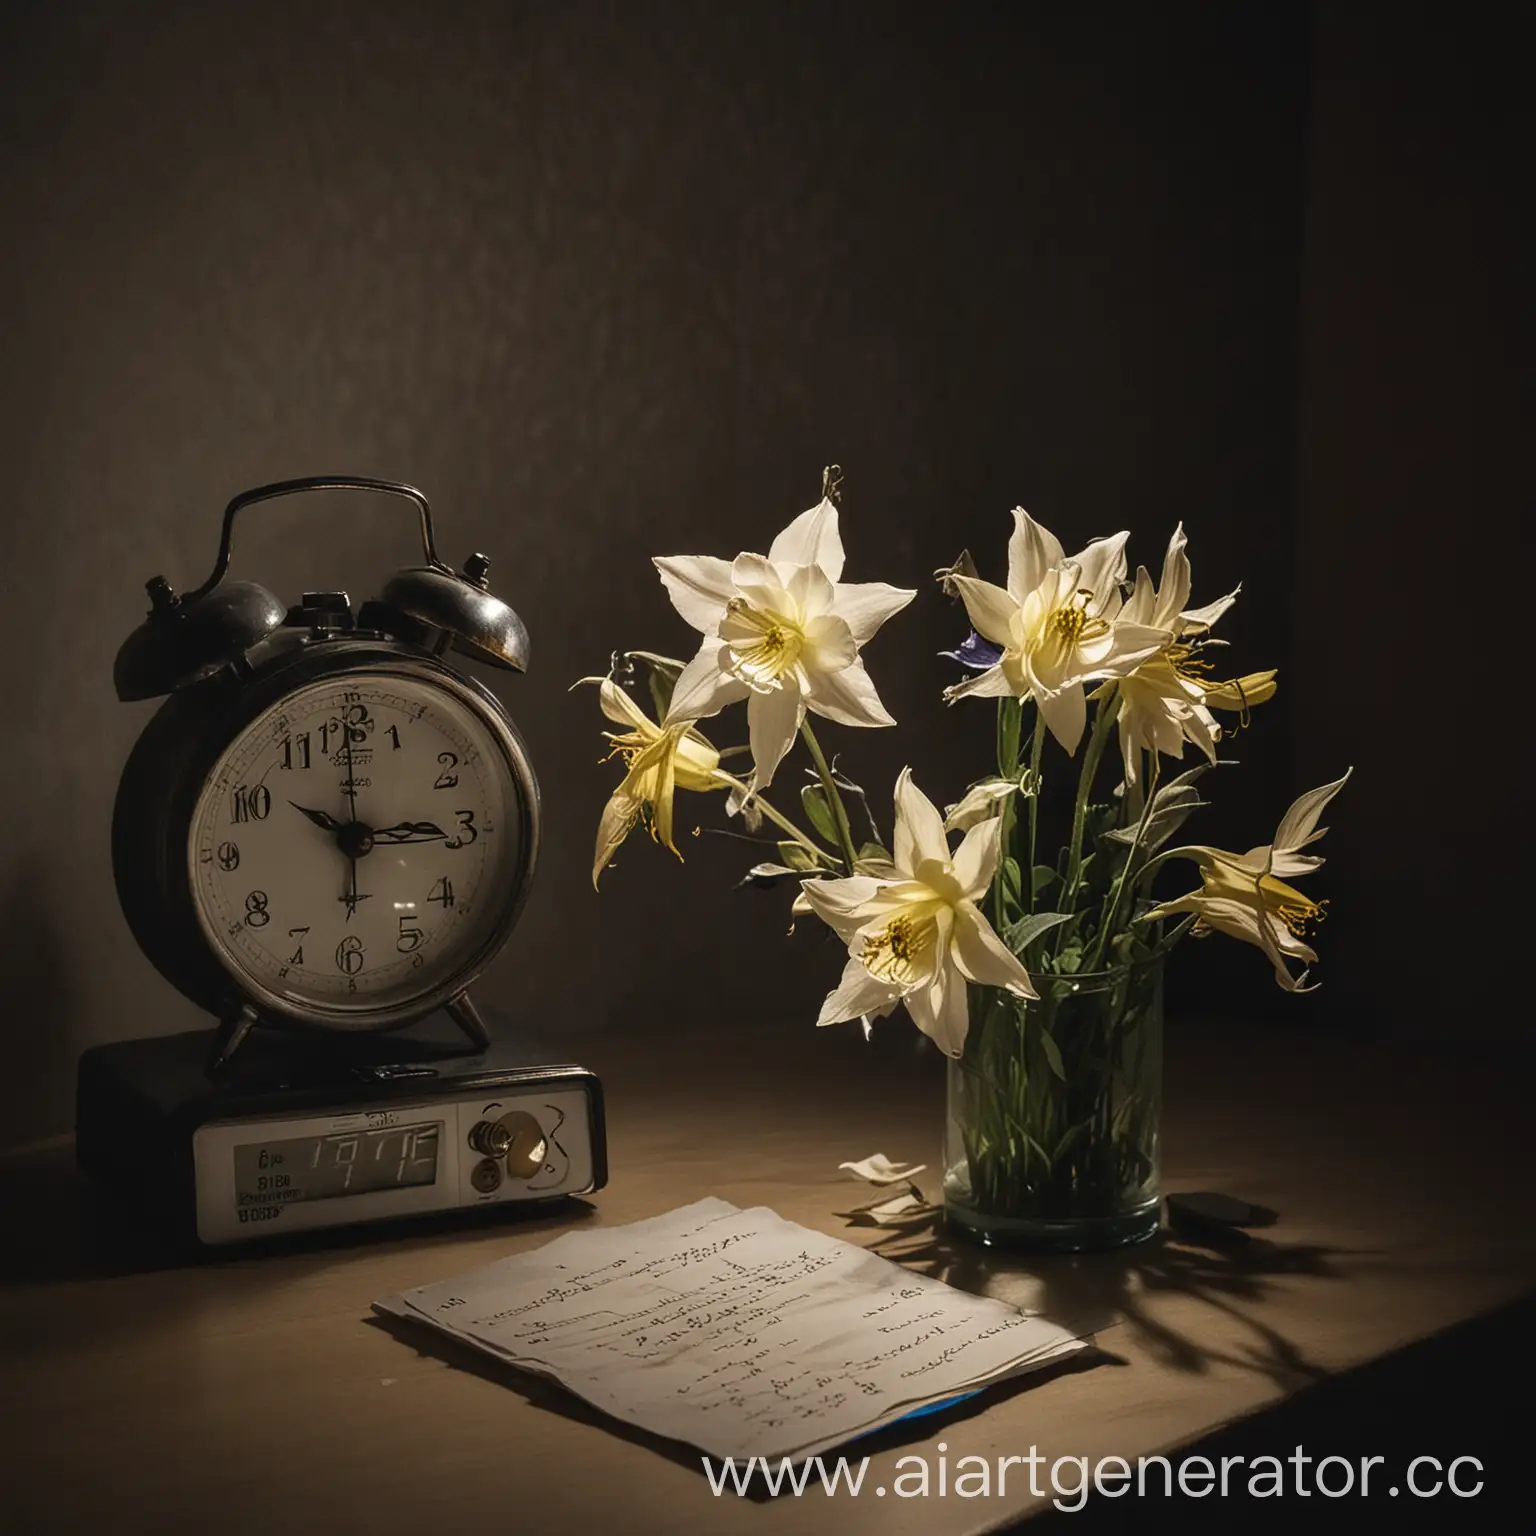 Two-Aquilegia-Eximia-Flowers-and-Electronic-Alarm-Clock-on-Bedside-Table-in-Dim-Night-Light